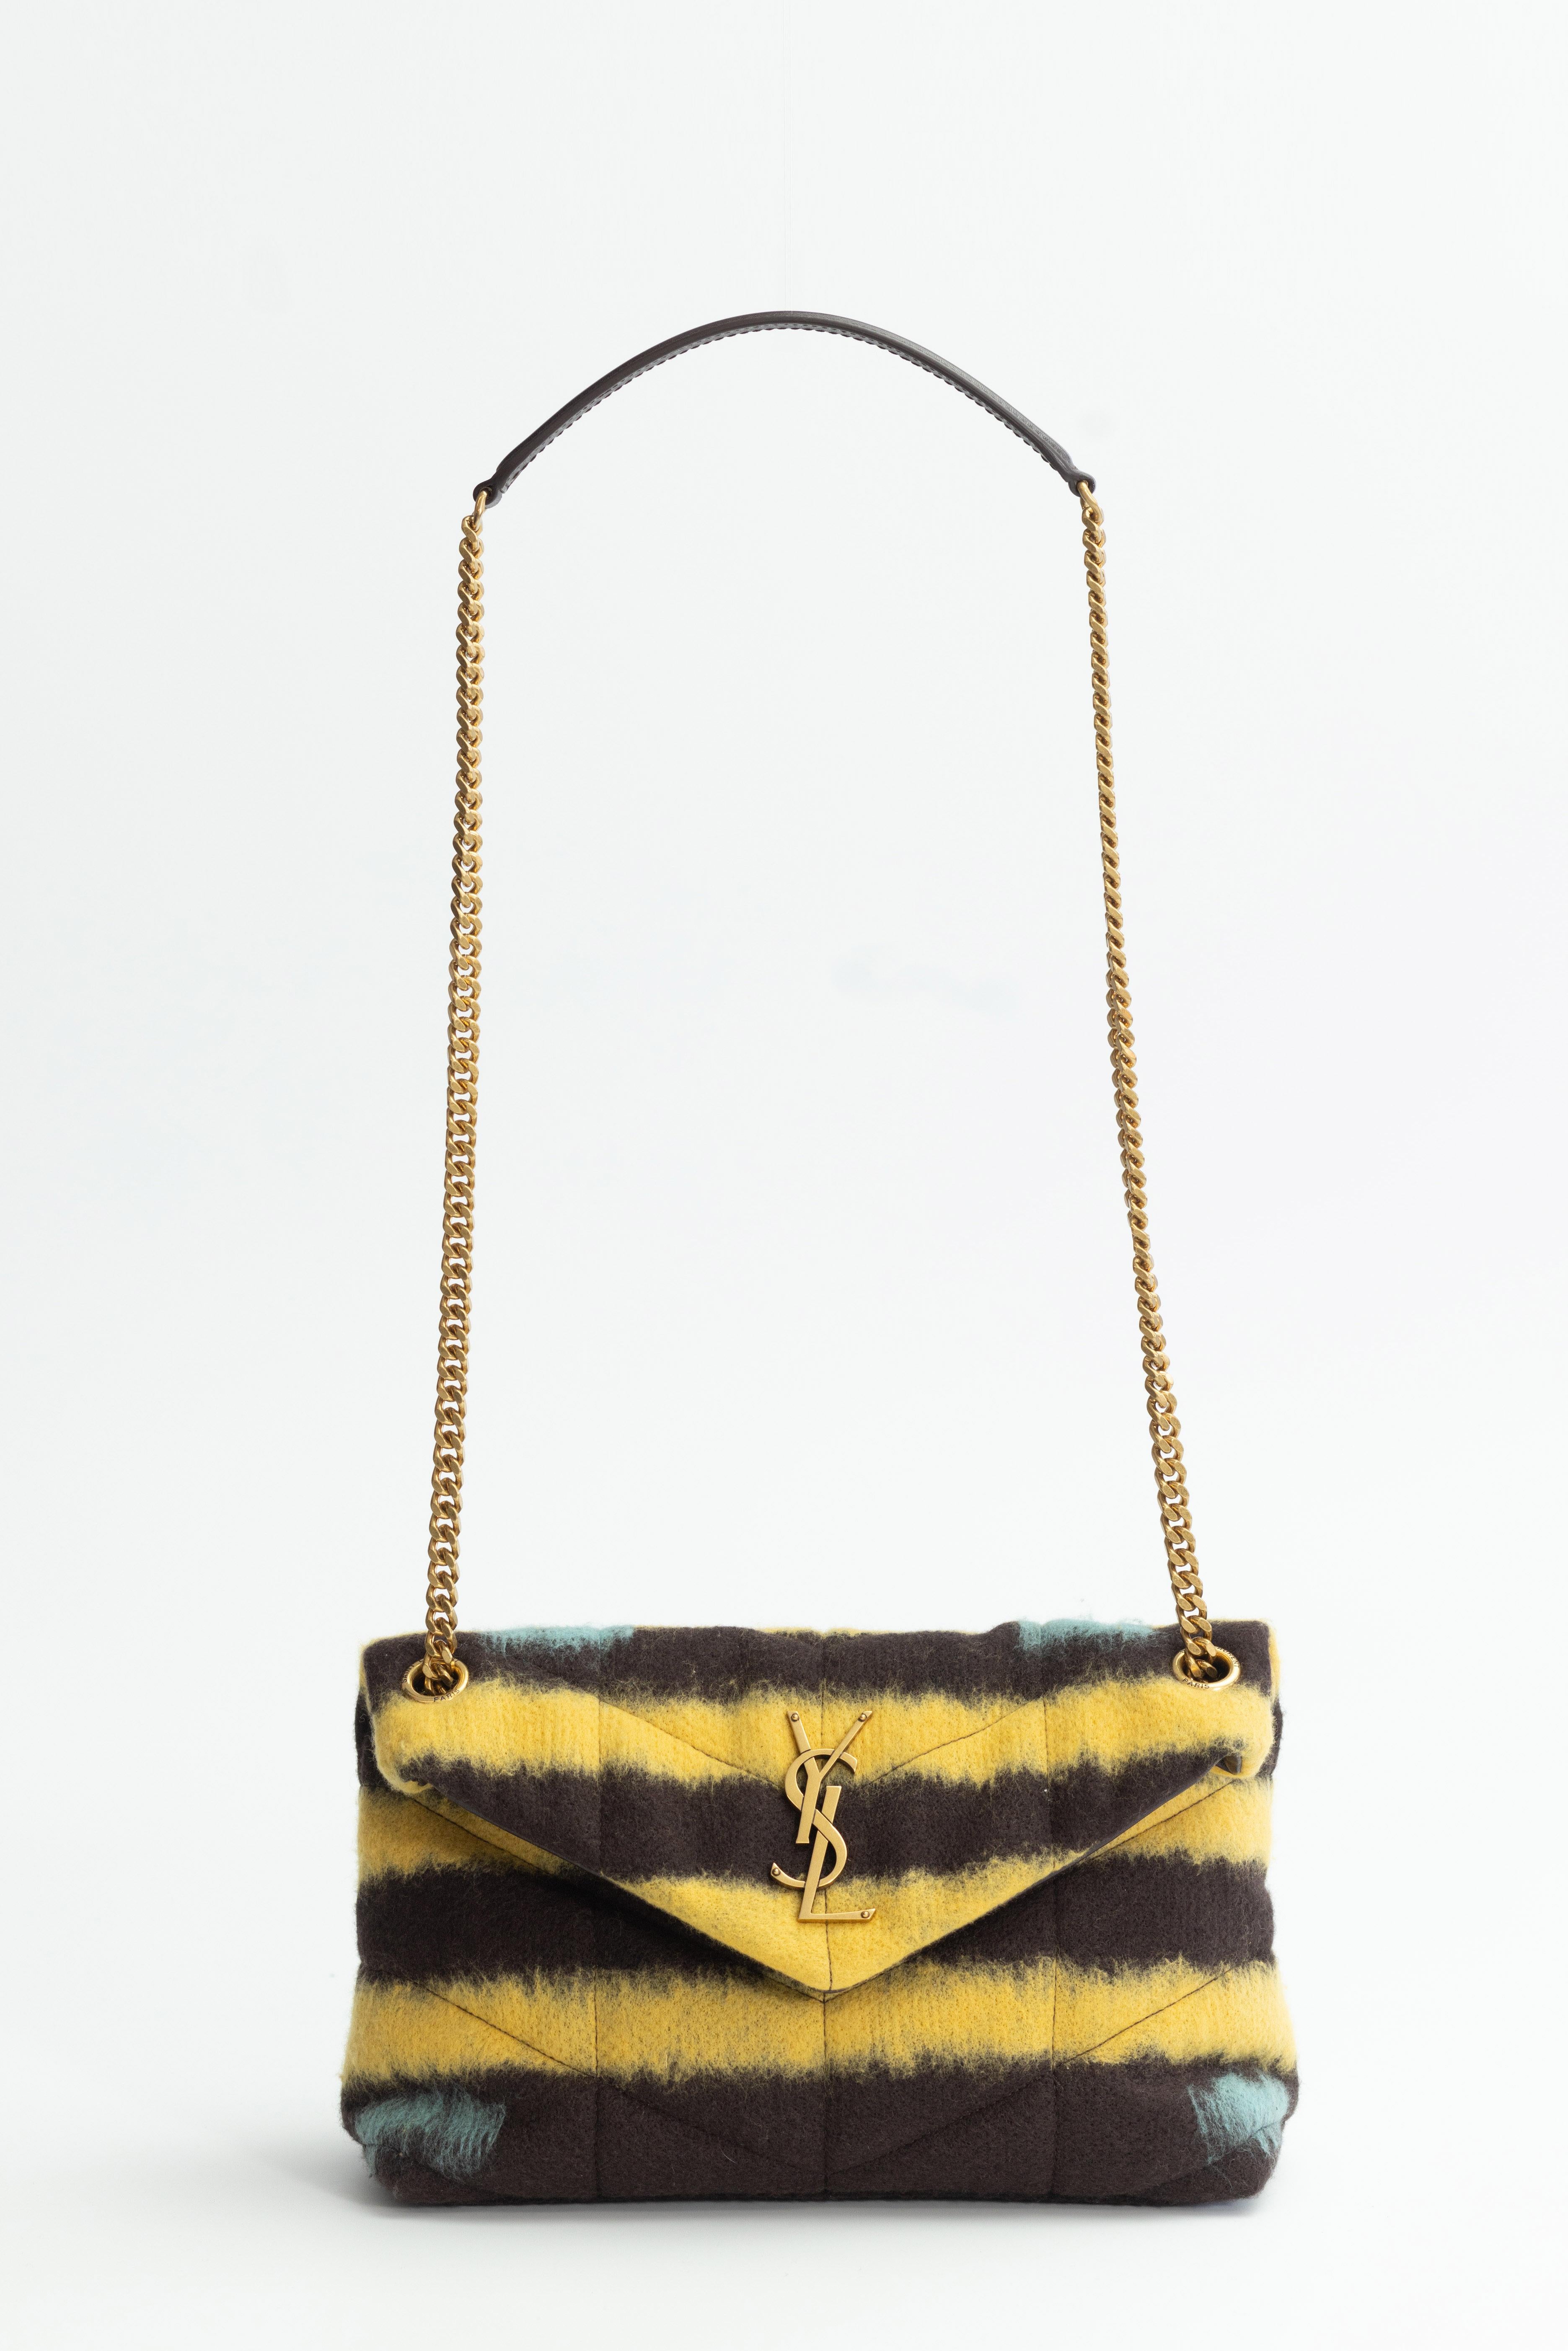 Saint Laurent Tie Dye Yellow Small Loulou Puffer Bag For Sale 7